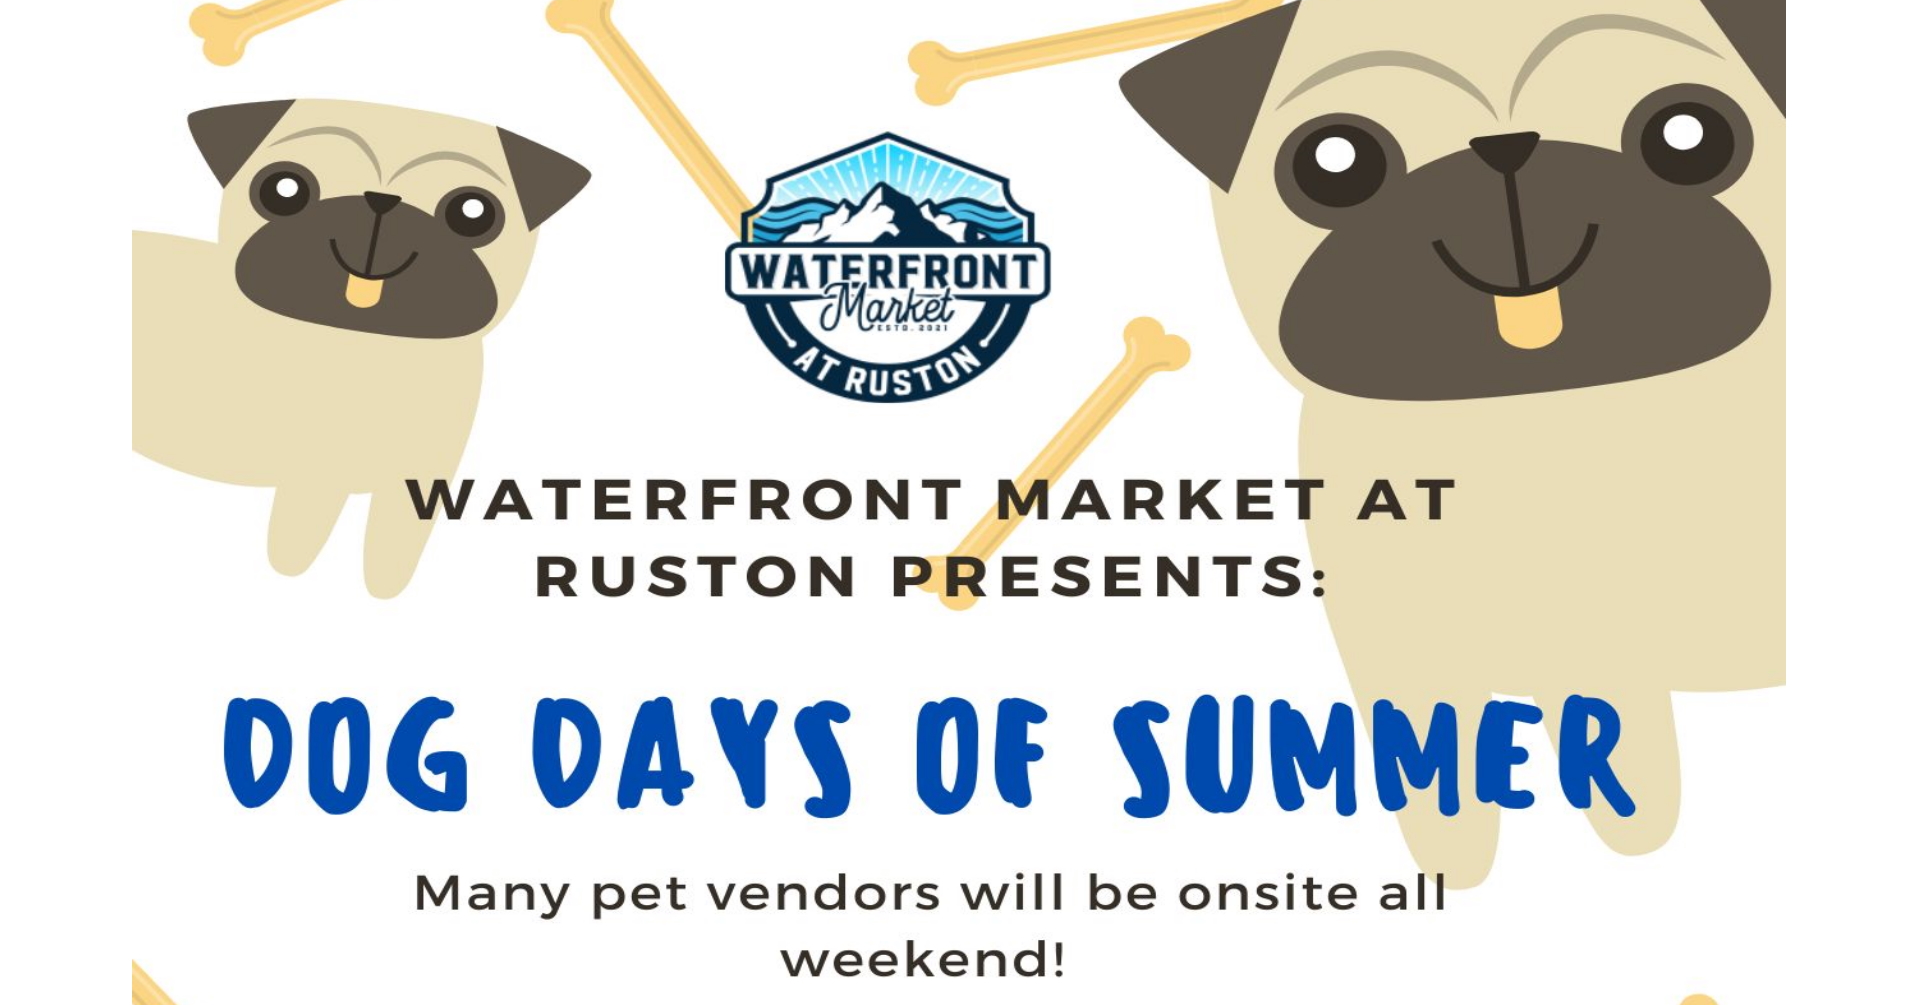 Pet Event in Tacoma - Dog Days of Summer - Waterfront Market at Ruston